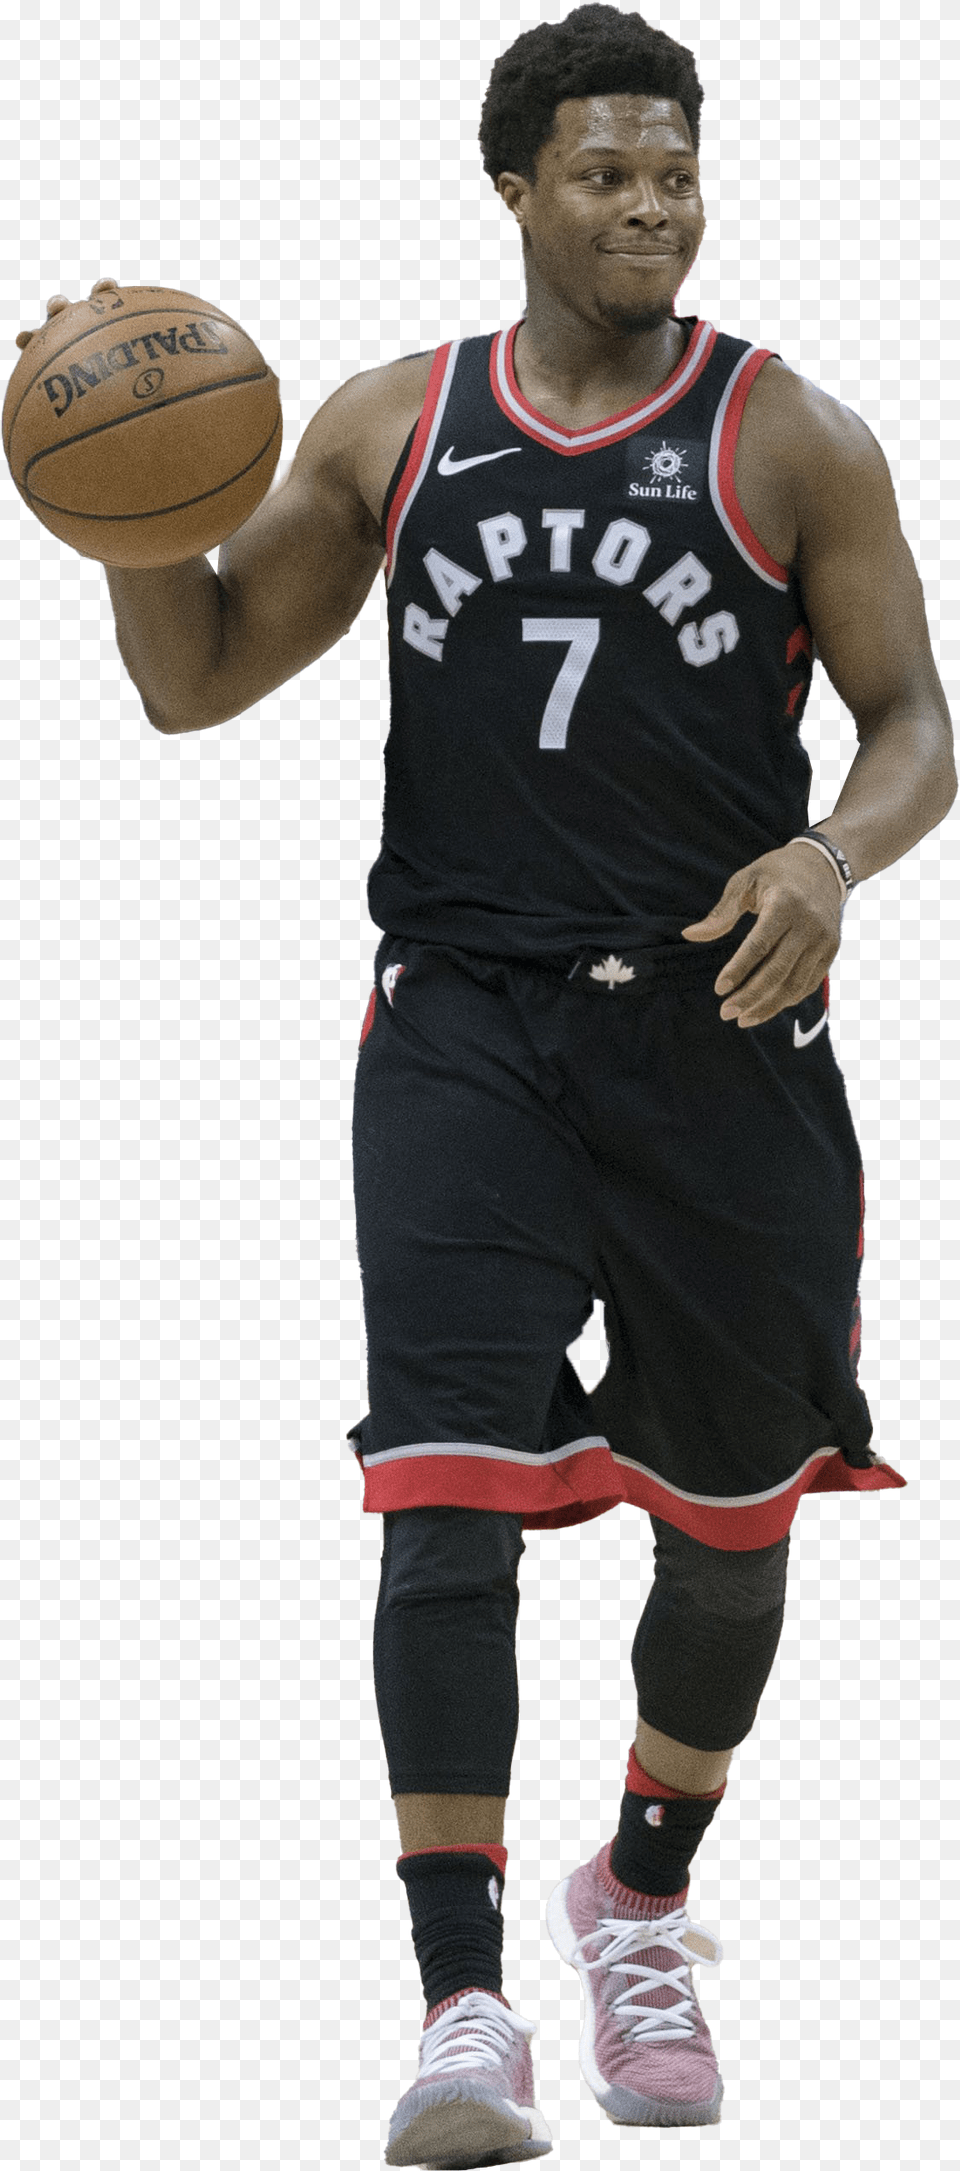 Kyle Lowry Transparent Background Transparent Background Nba Player, Sport, Footwear, Clothing, Basketball (ball) Png Image